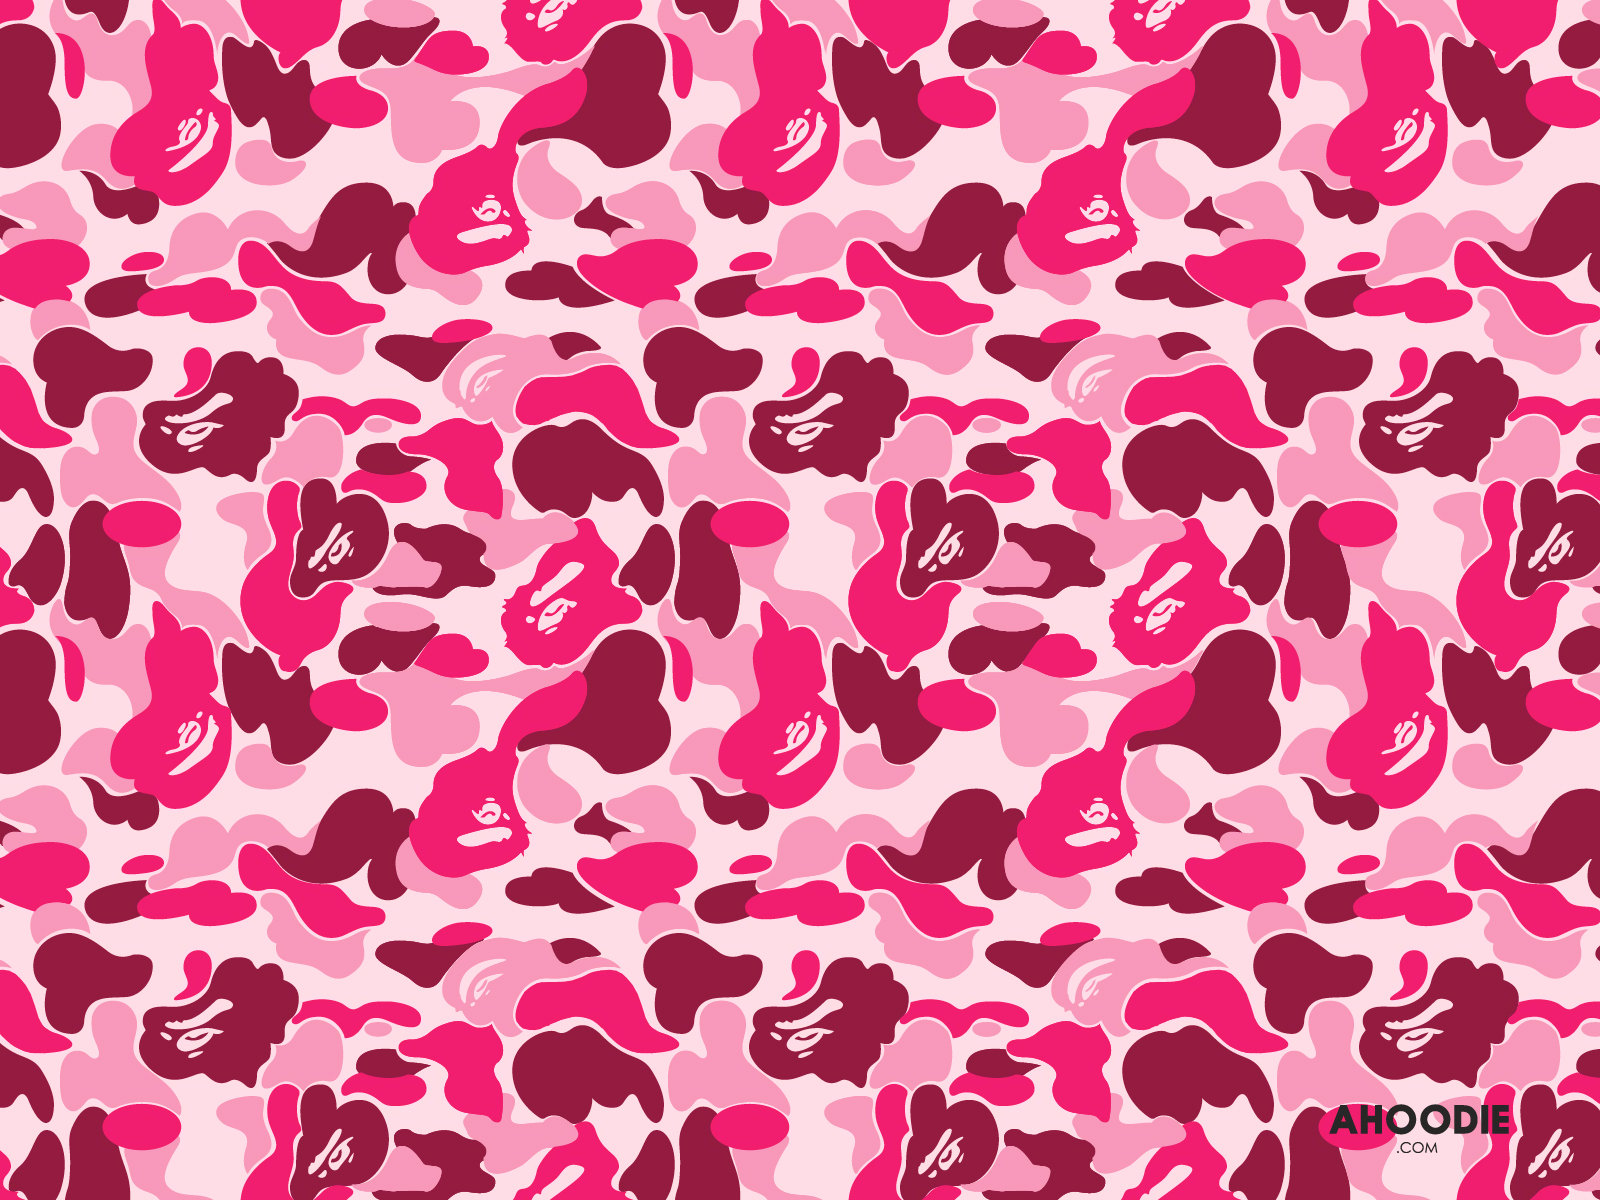 Camo Camo Wallpaper Pink Camo and Wallpaper For Iphone 1600x1200